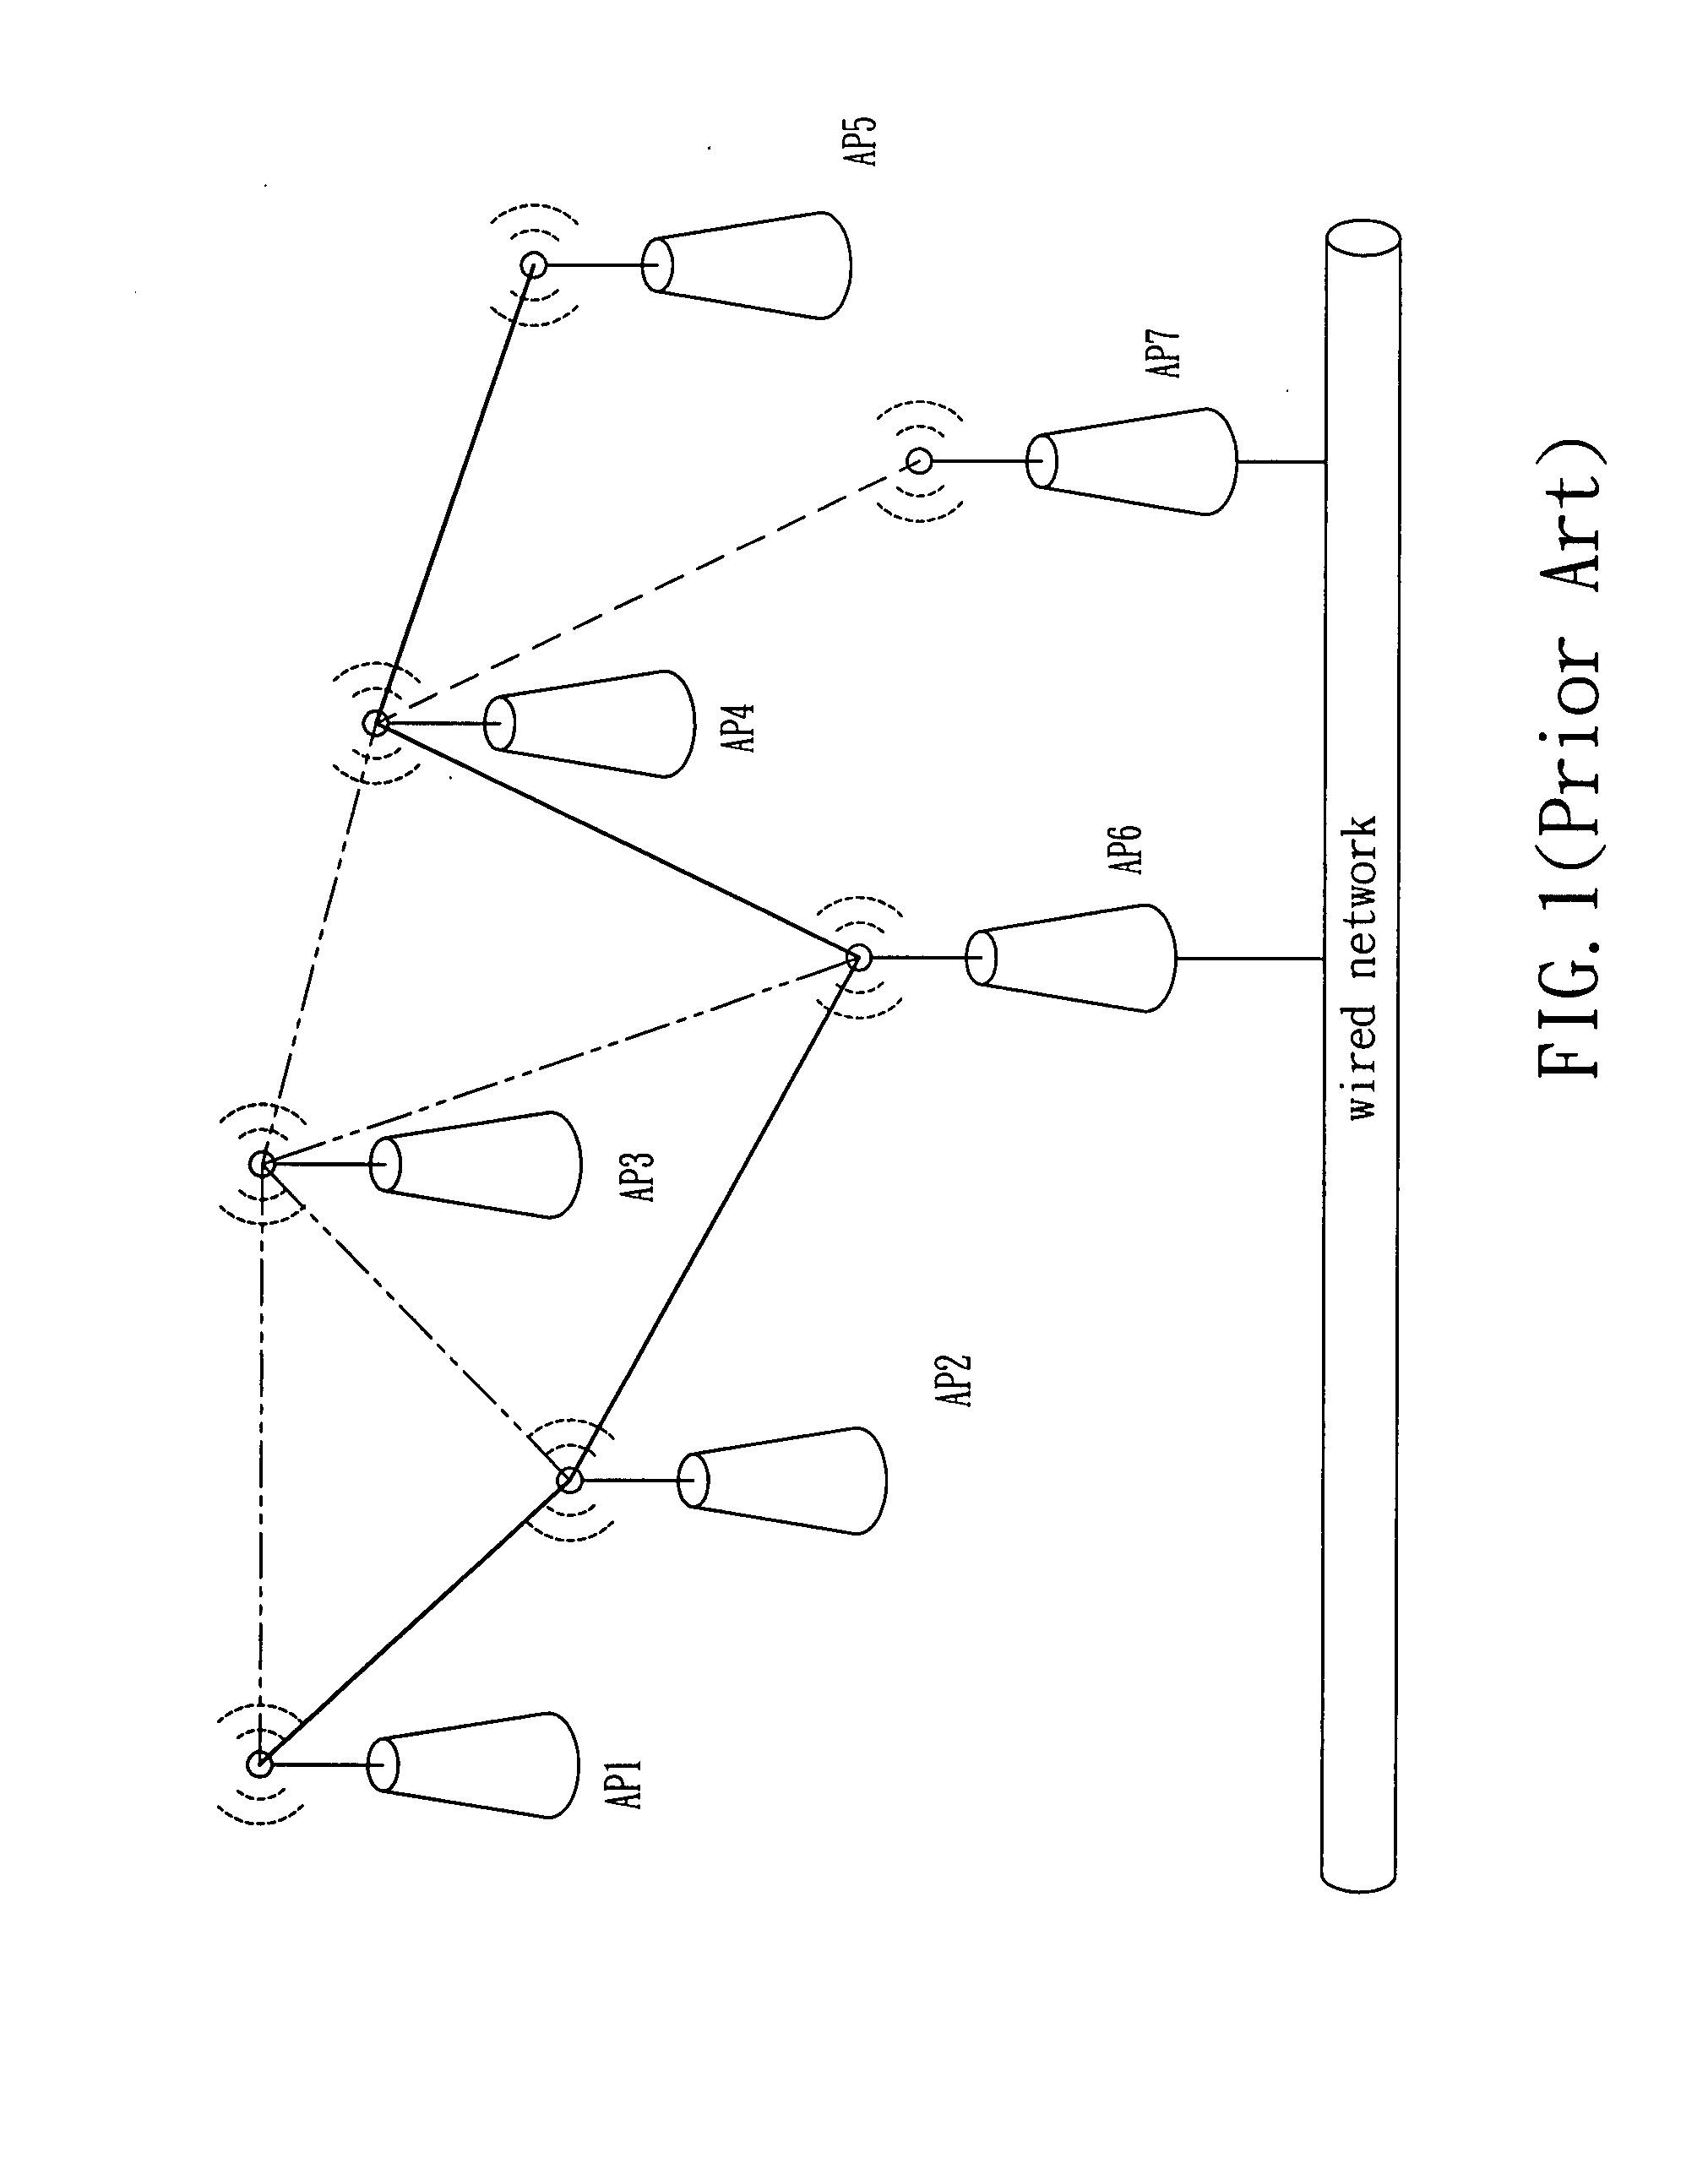 Topology system of wireless network with dynamic balance